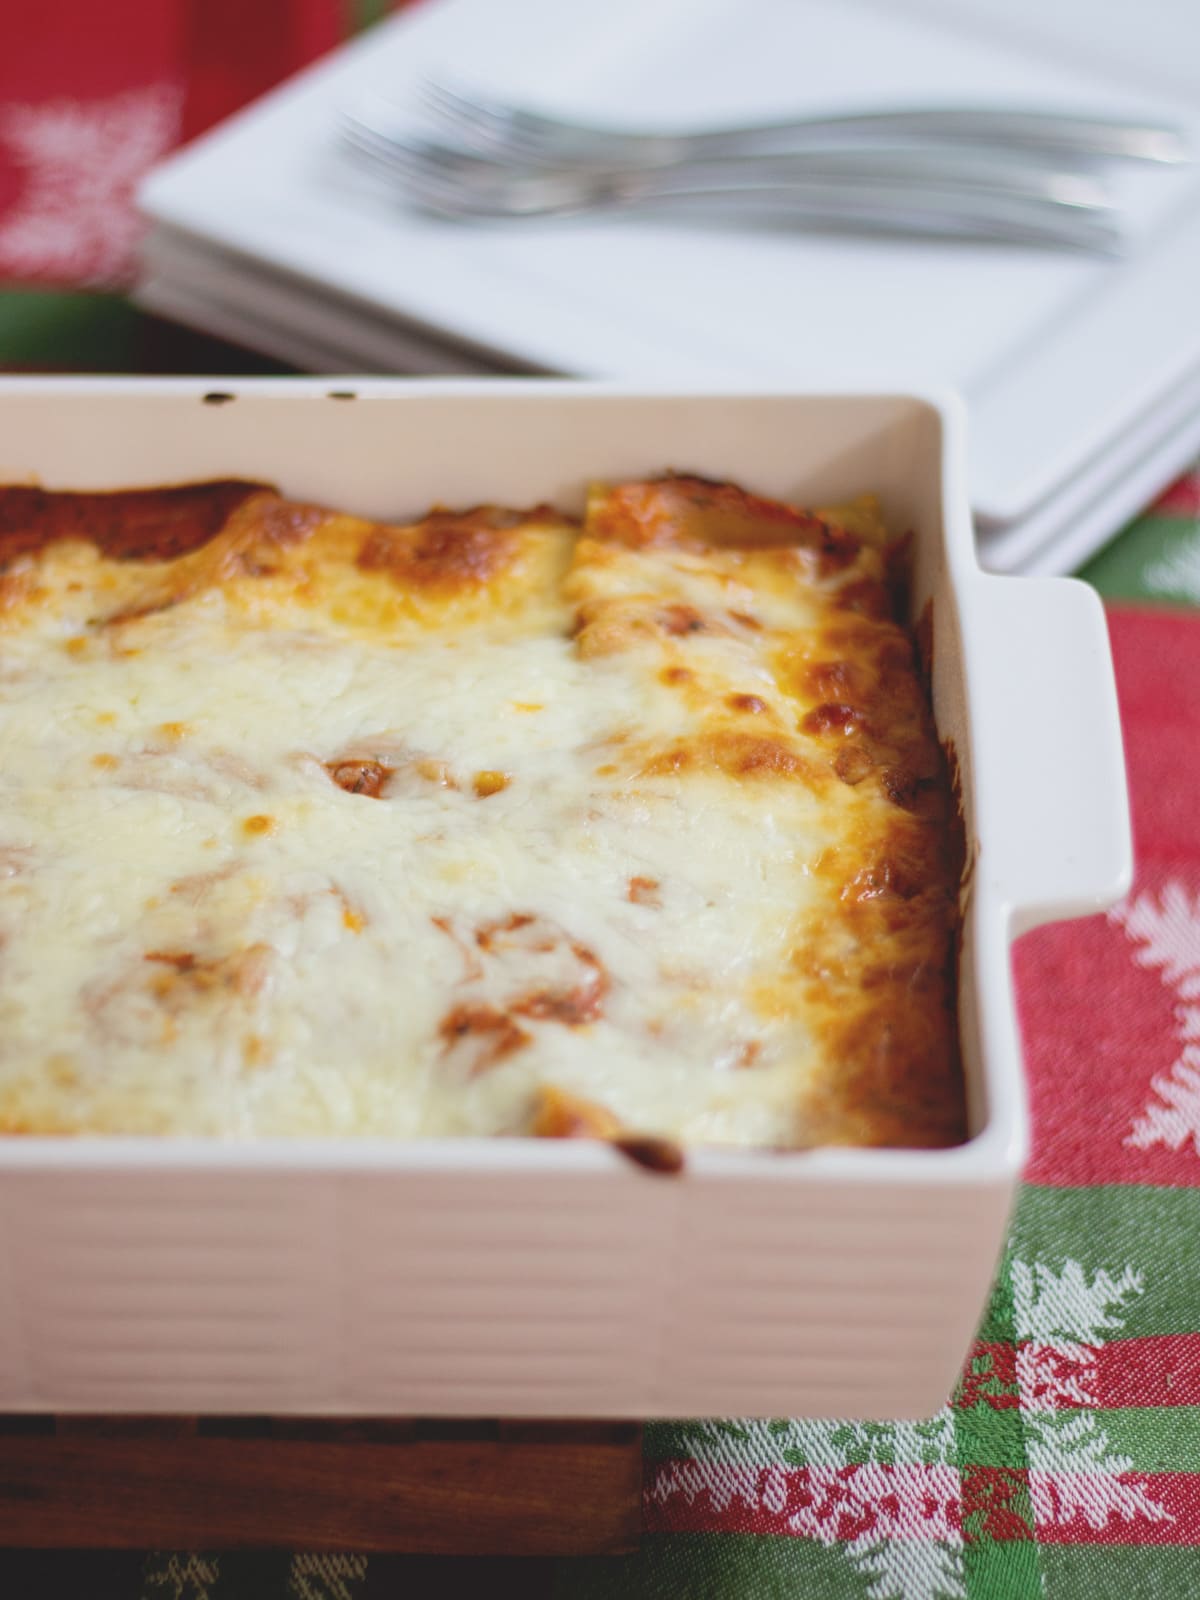 A delicious homemade lasagna with creamy béchamel and ricotta cheese inside. Traditional Lasagna is a comfort food classic.